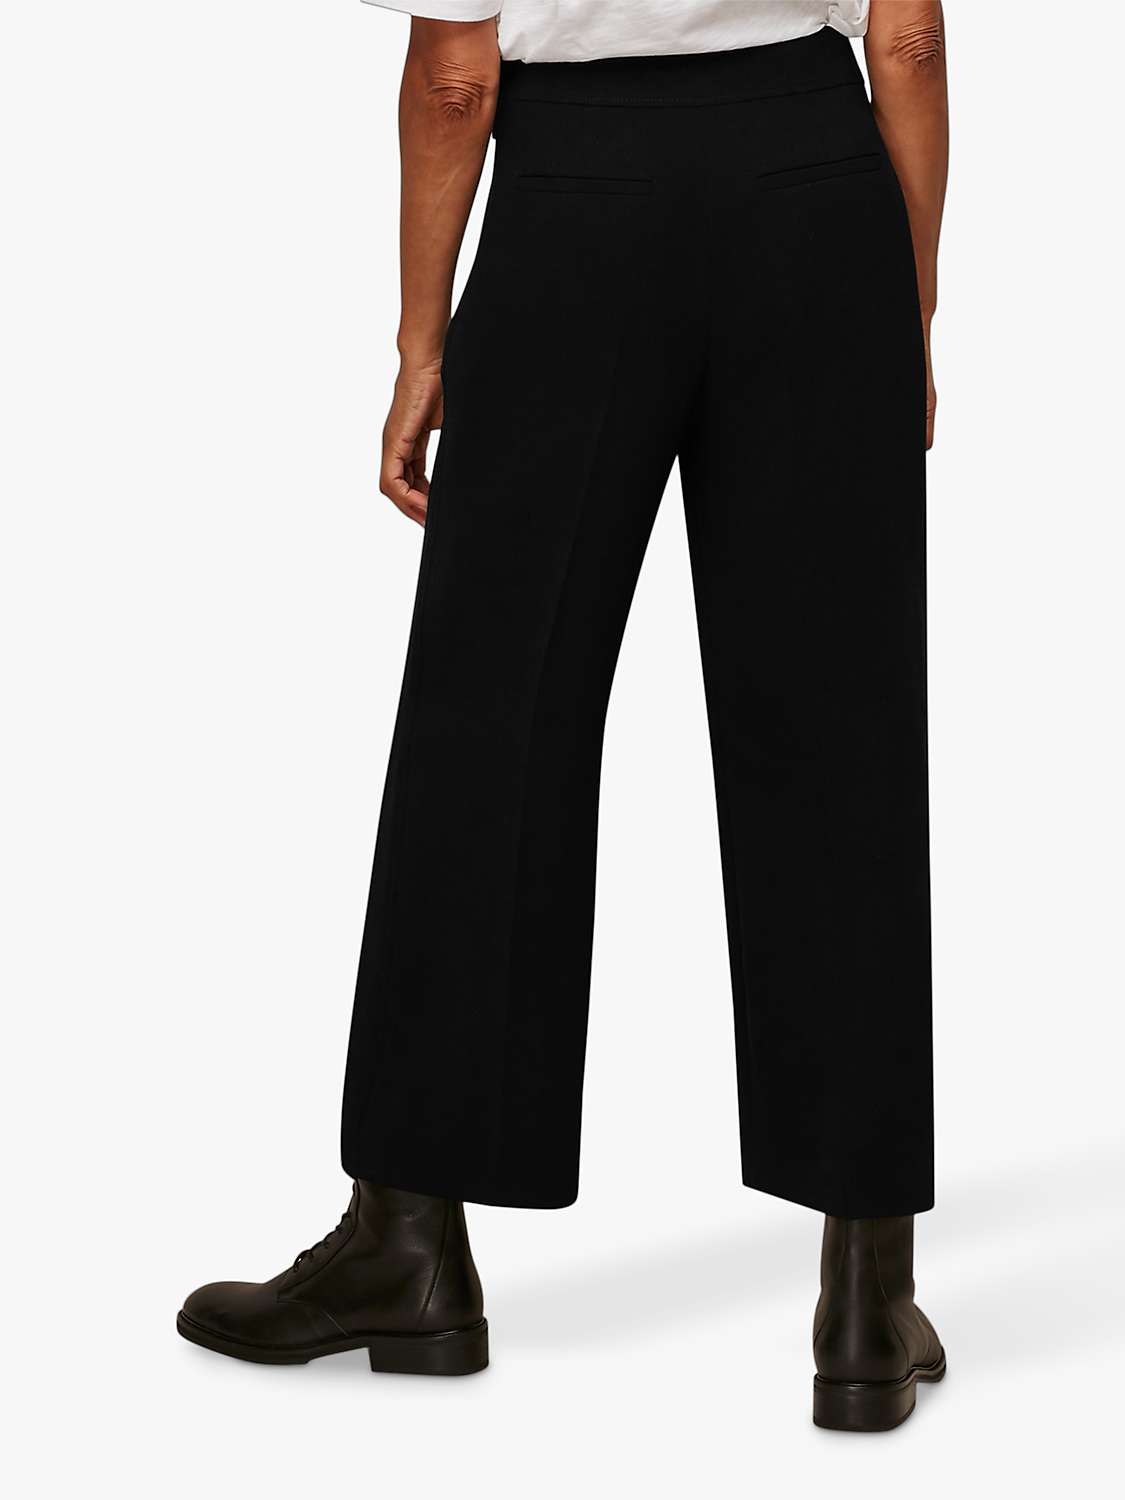 Whistles Wide Leg Ankle Grazer Trousers, Black at John Lewis & Partners